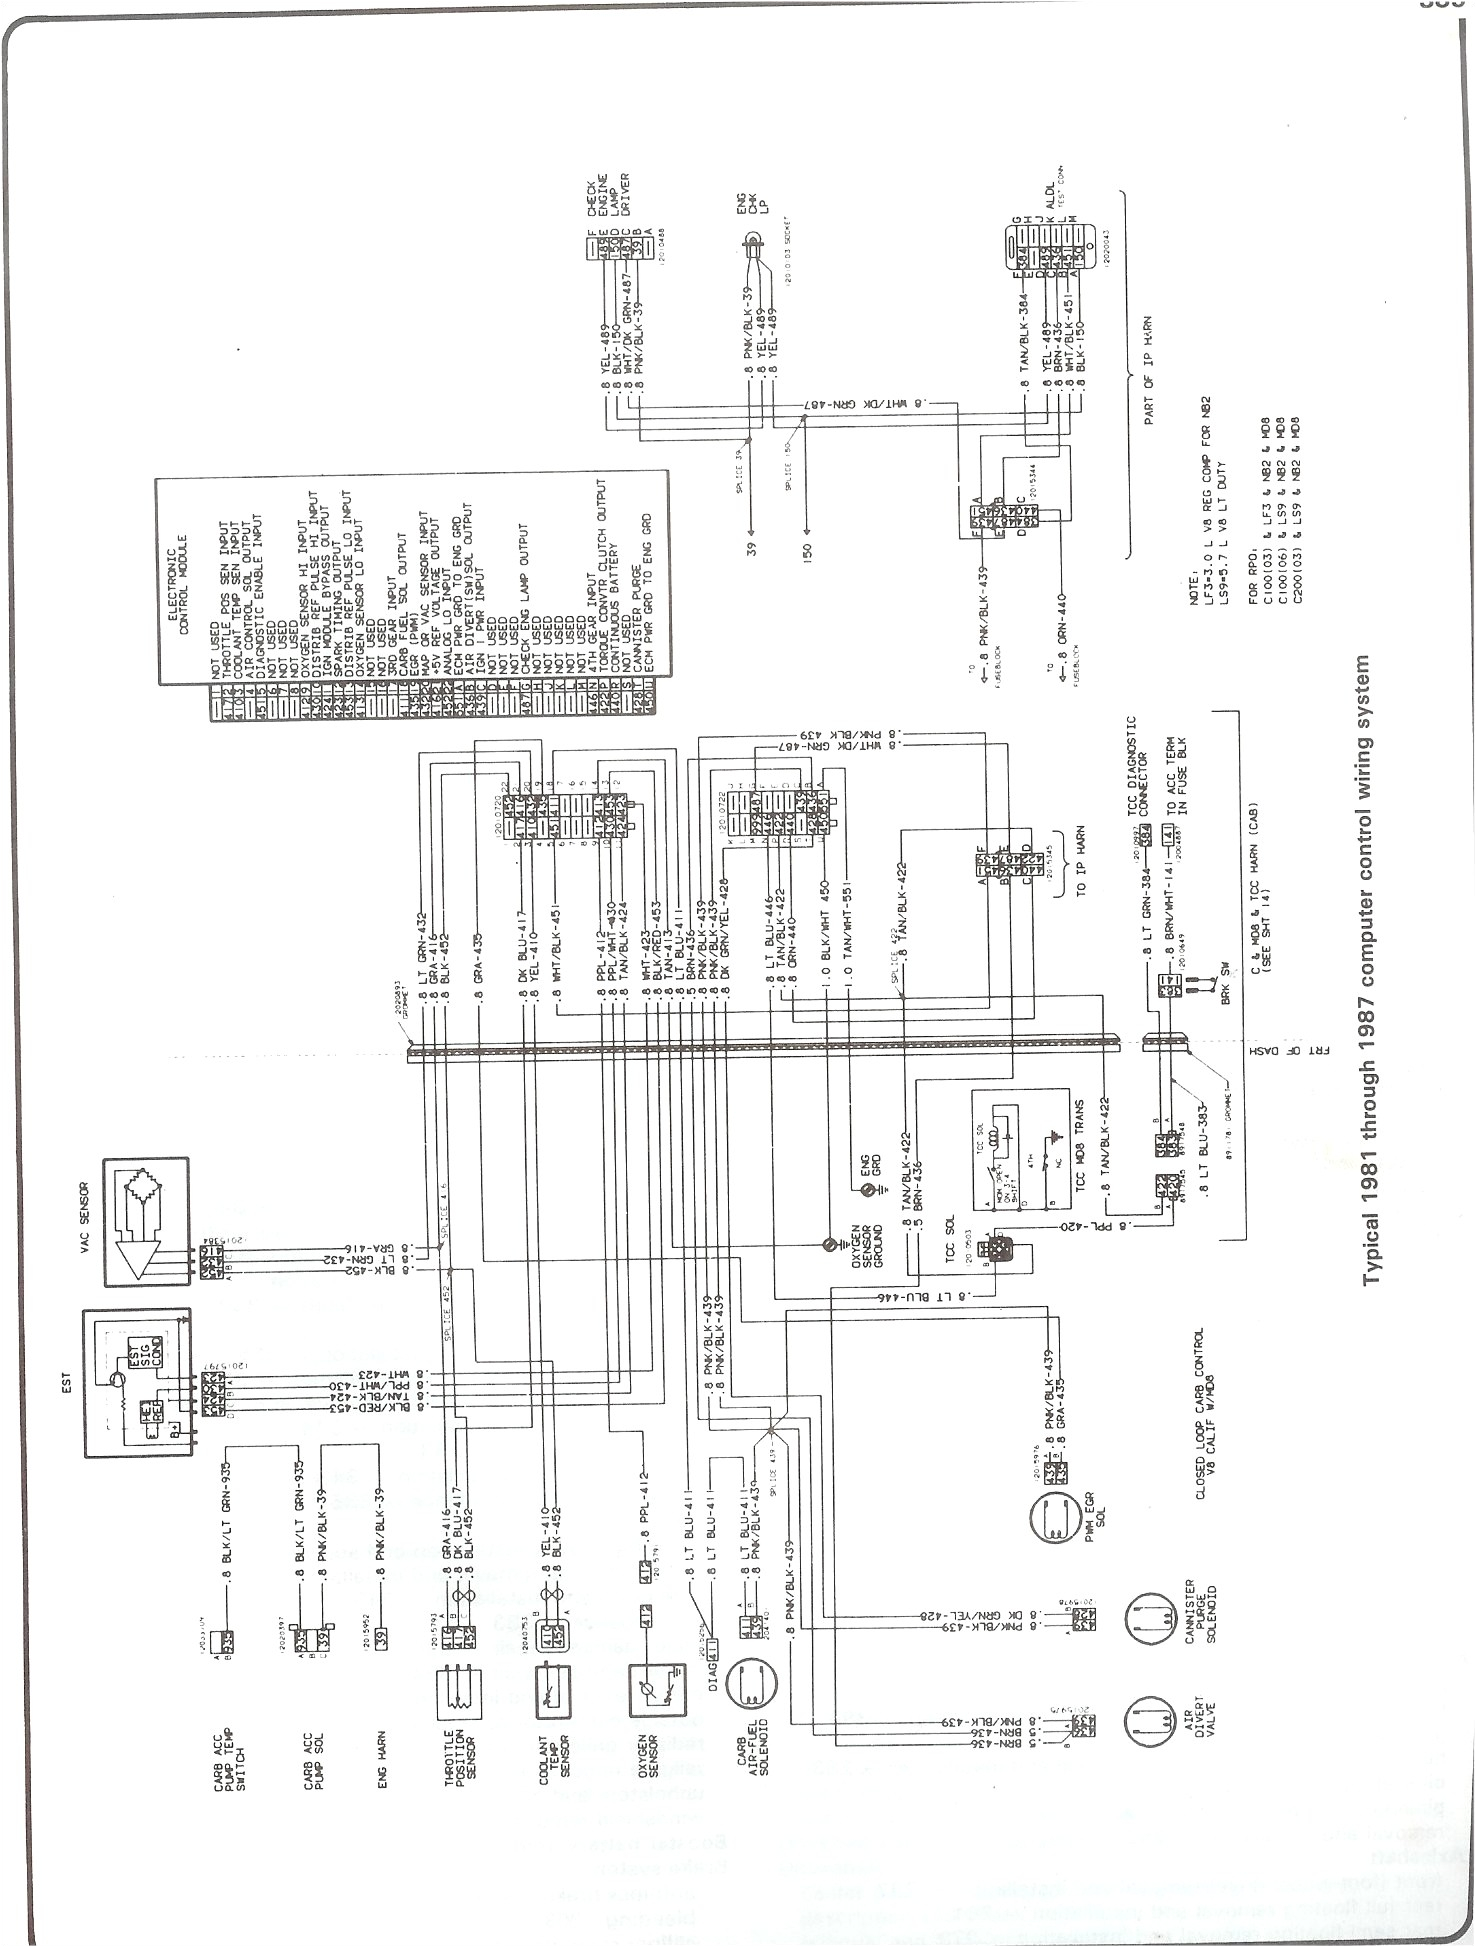 1984 chevy c70 wiring harness wiring diagram img mix 84 chevy truck wiring harness wiring diagram